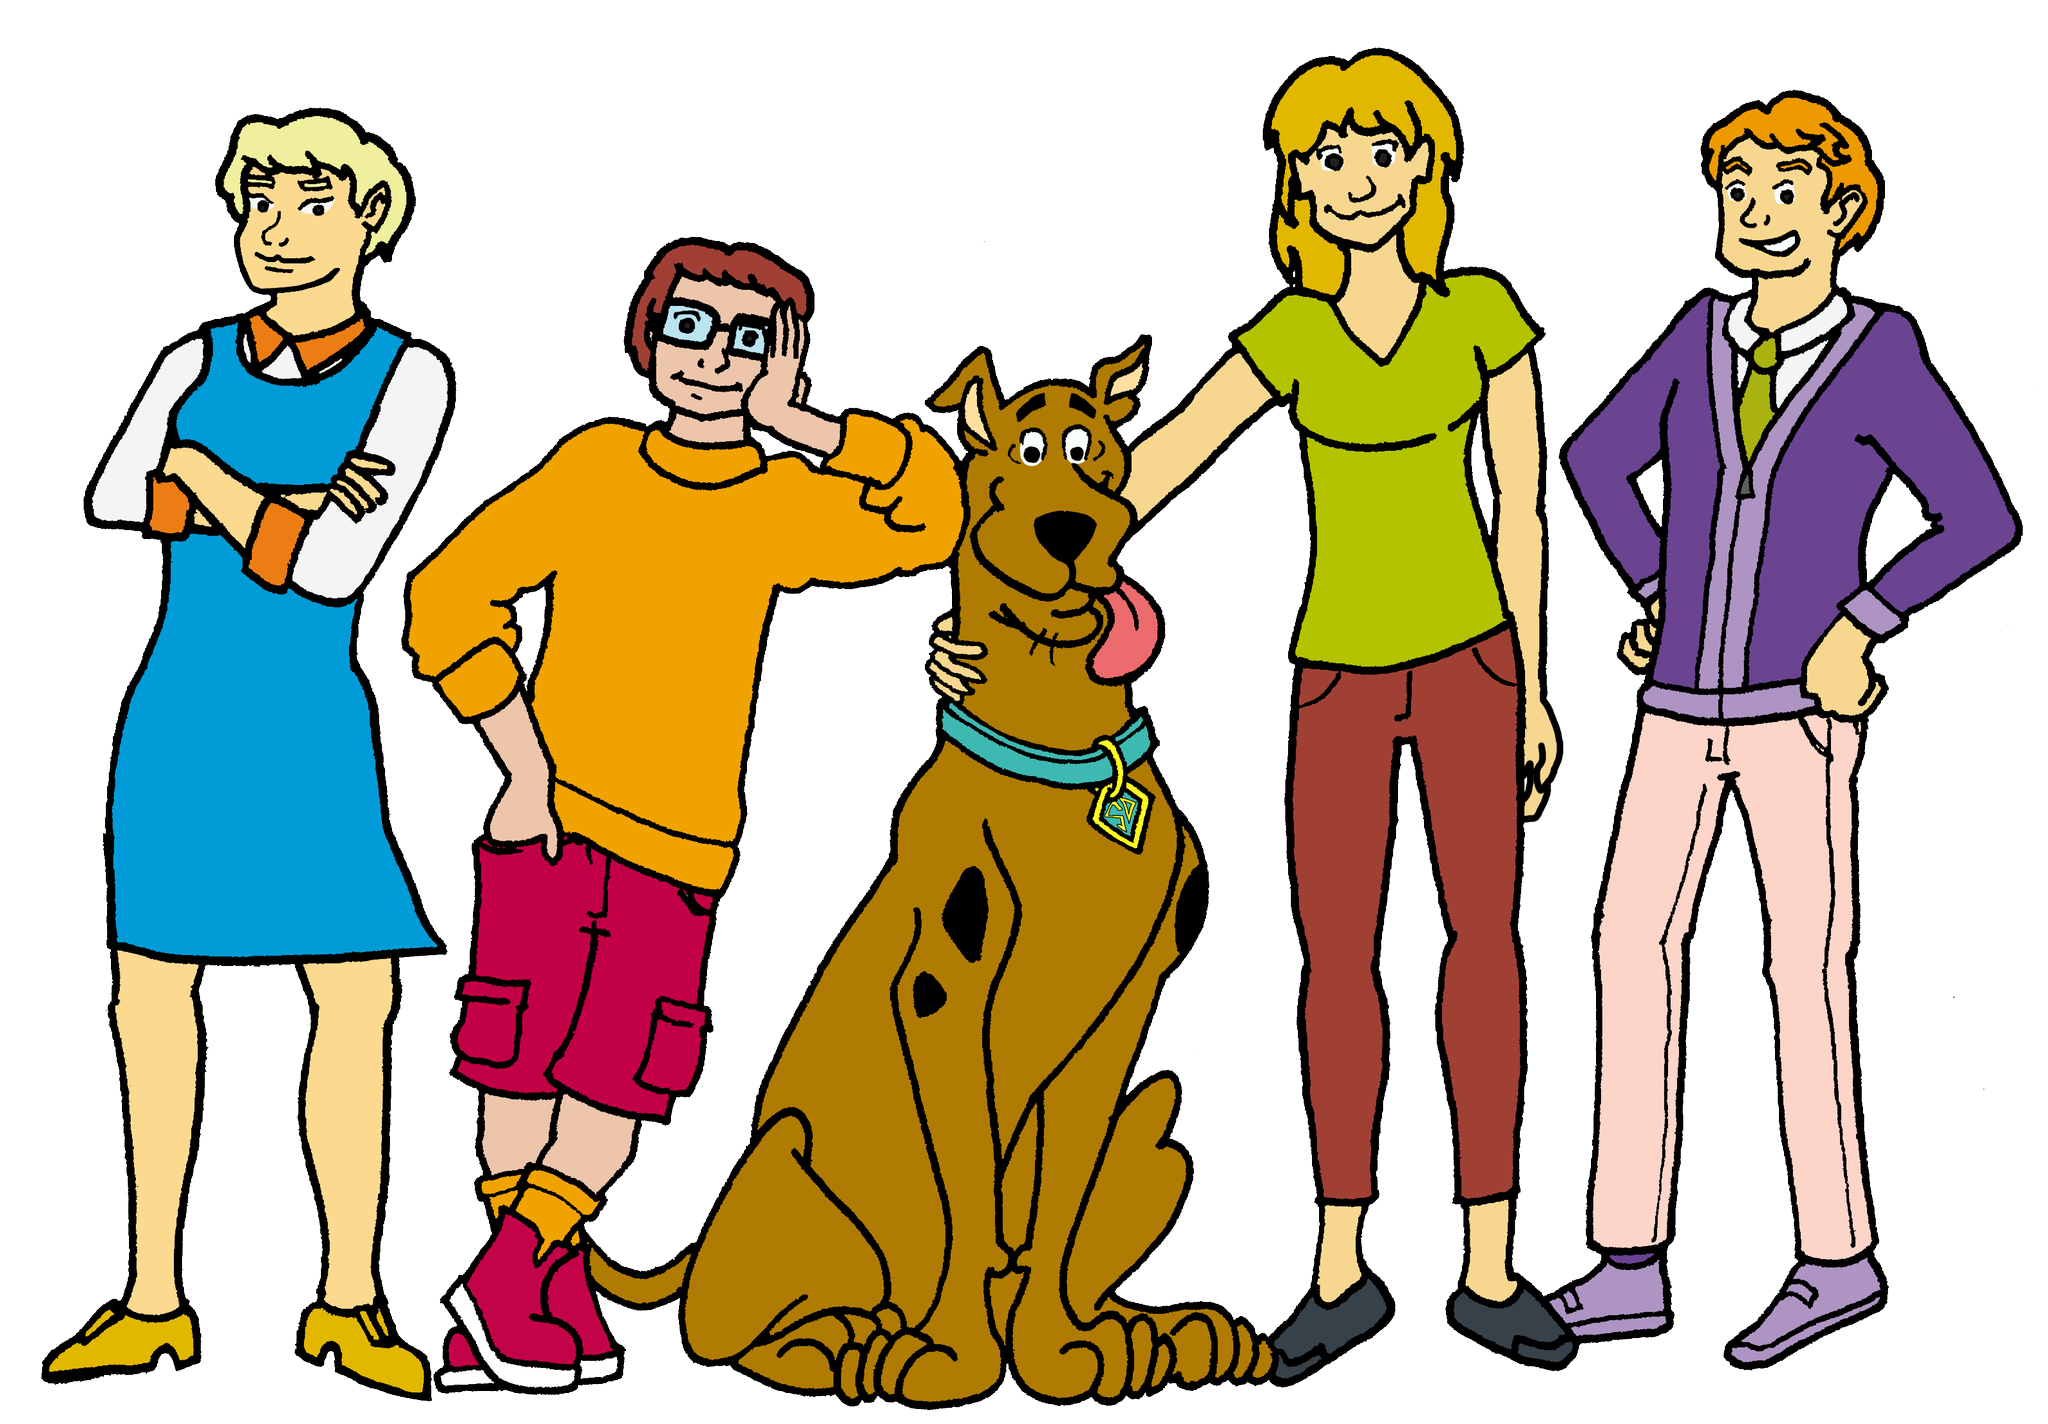 Scooby Dudes na Twitterze: "Hey gang, does anyone know of any rad Scoo...